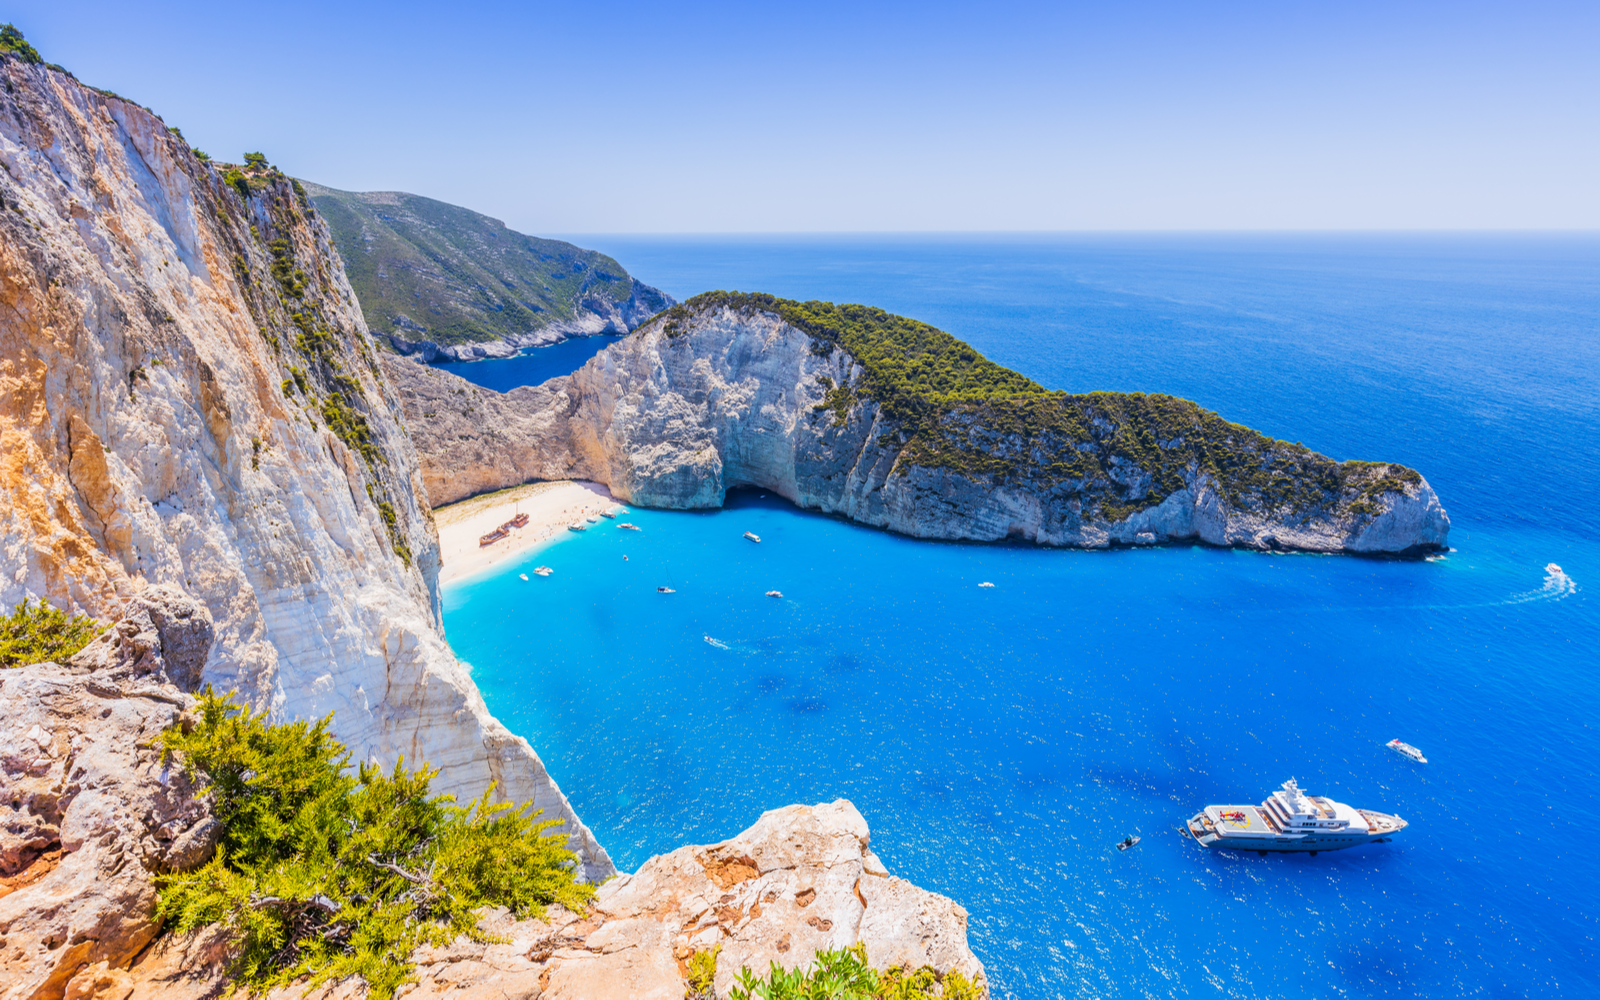 Shipwreck at Zakynthos, one of the best islands in Greece